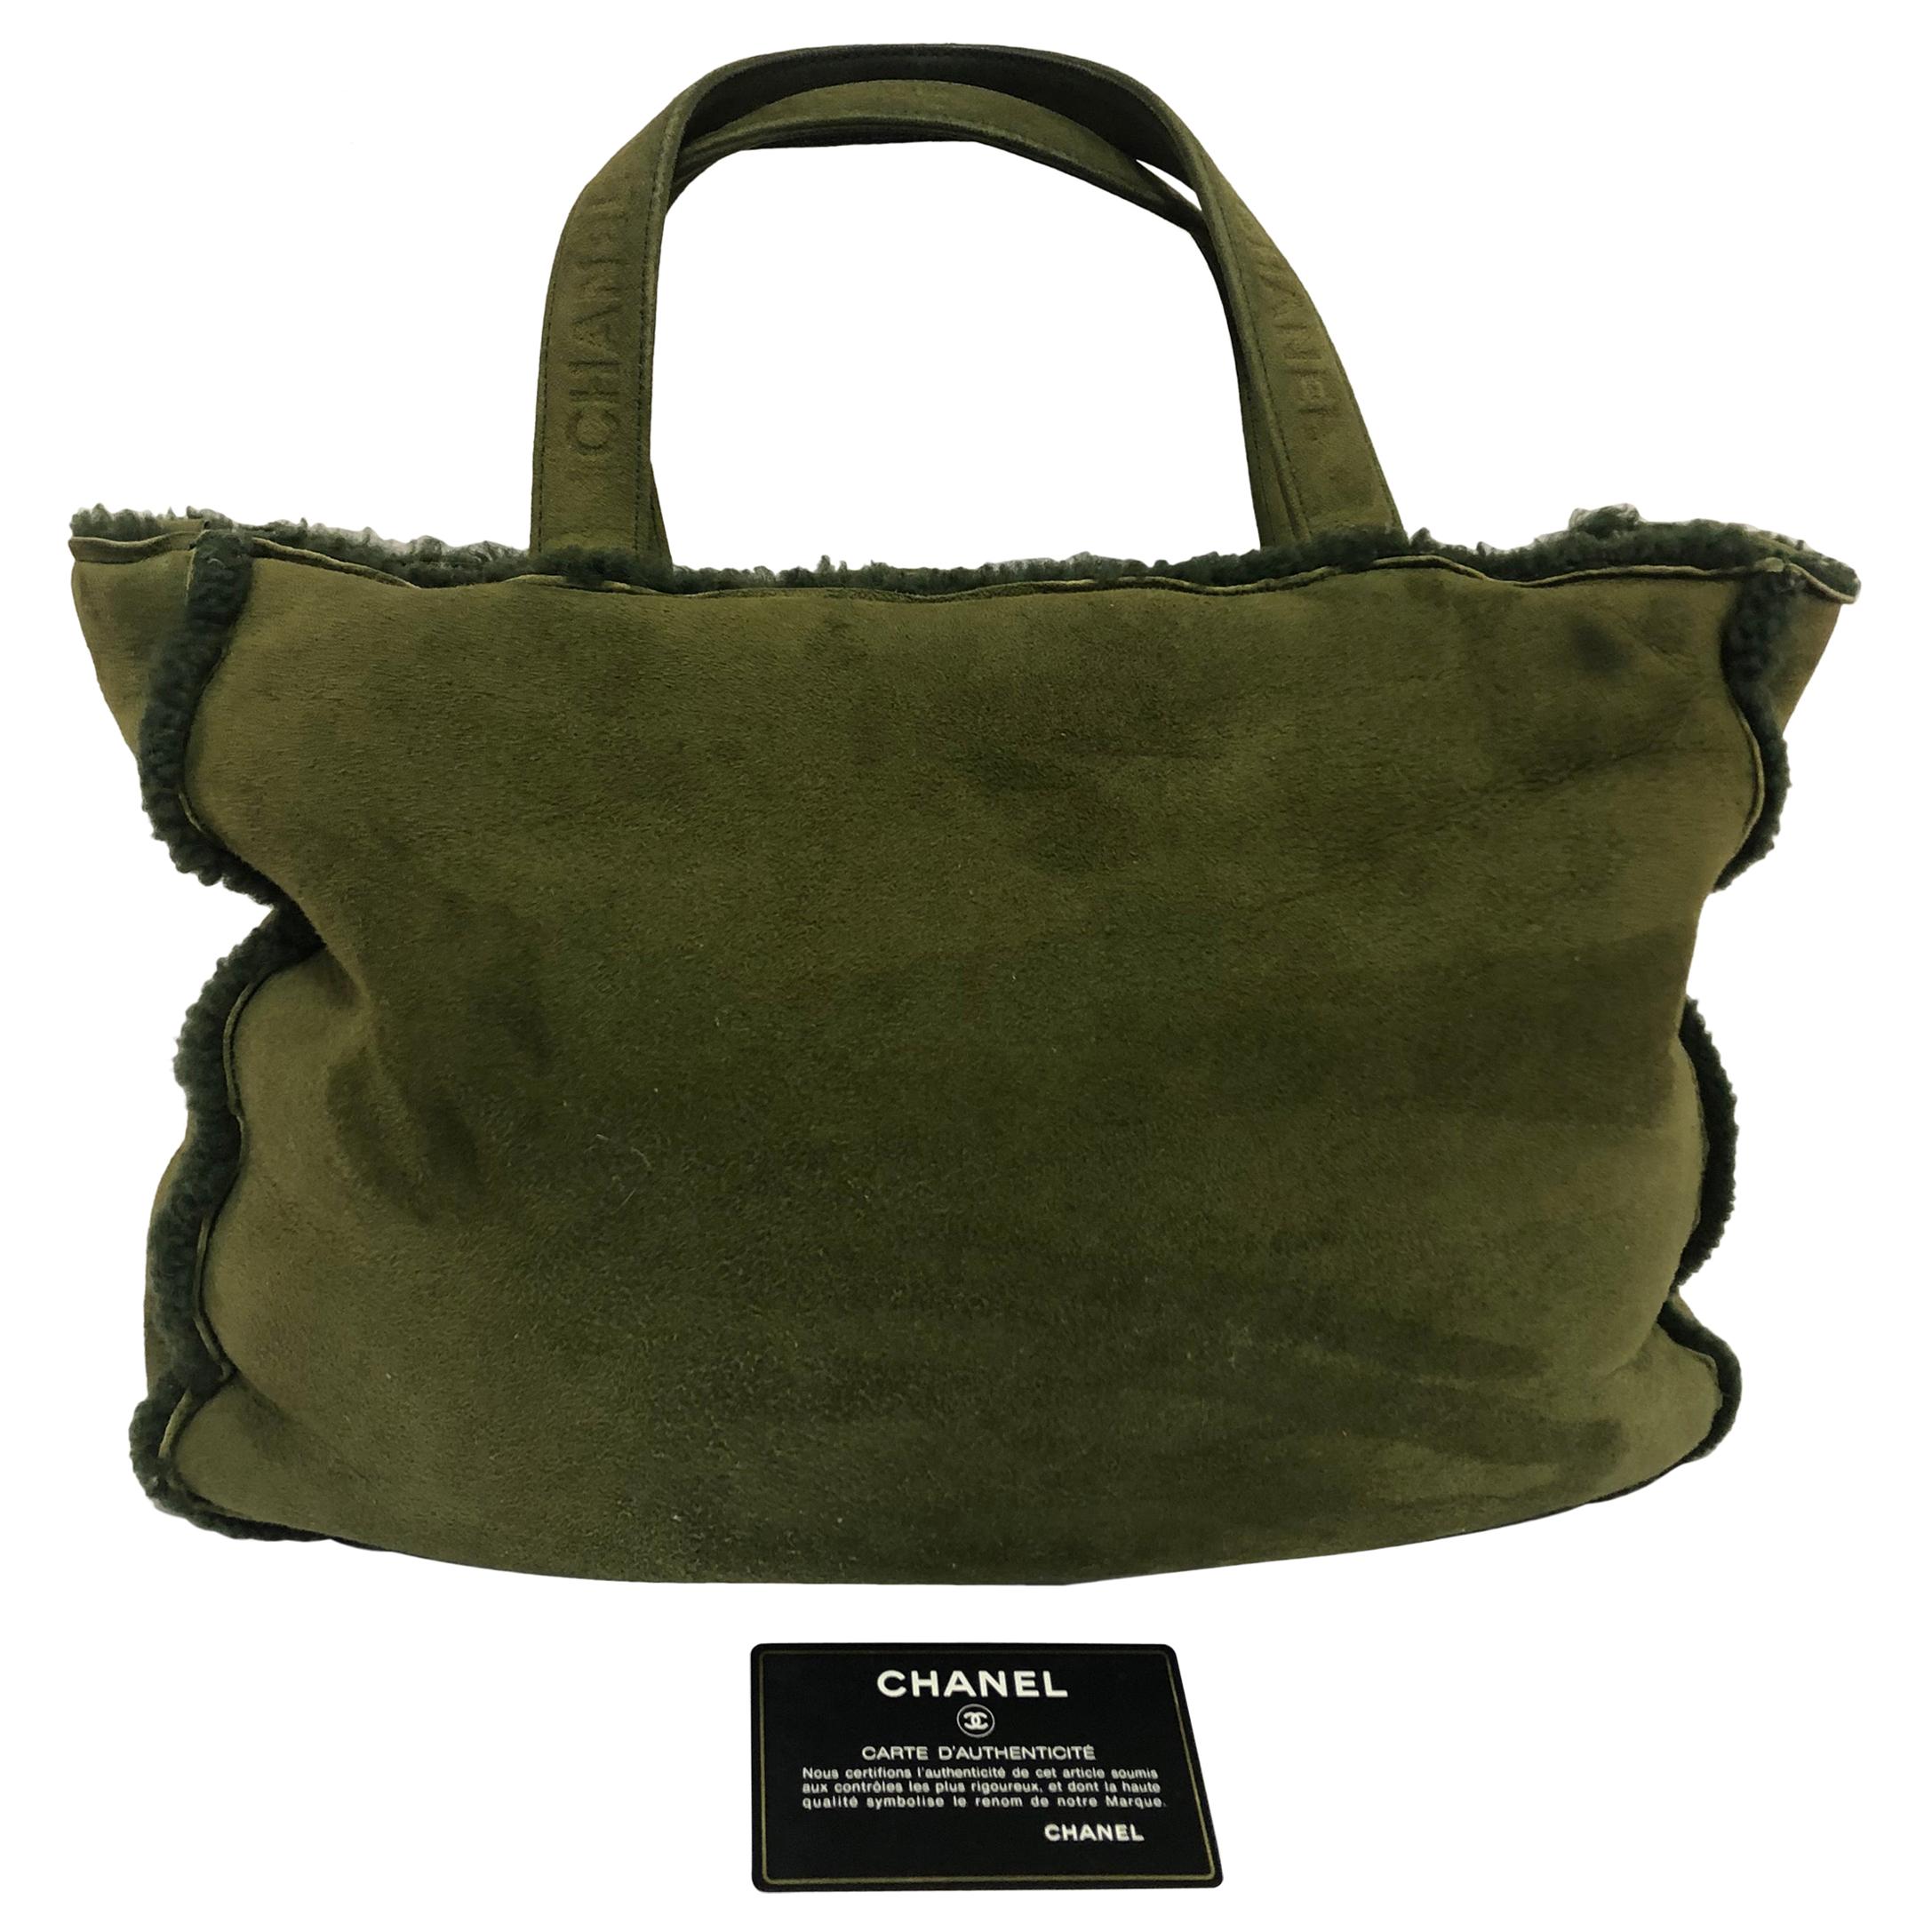 1996/97 Chanel Large Green Mouton/Suede Handbag w/COA and Card